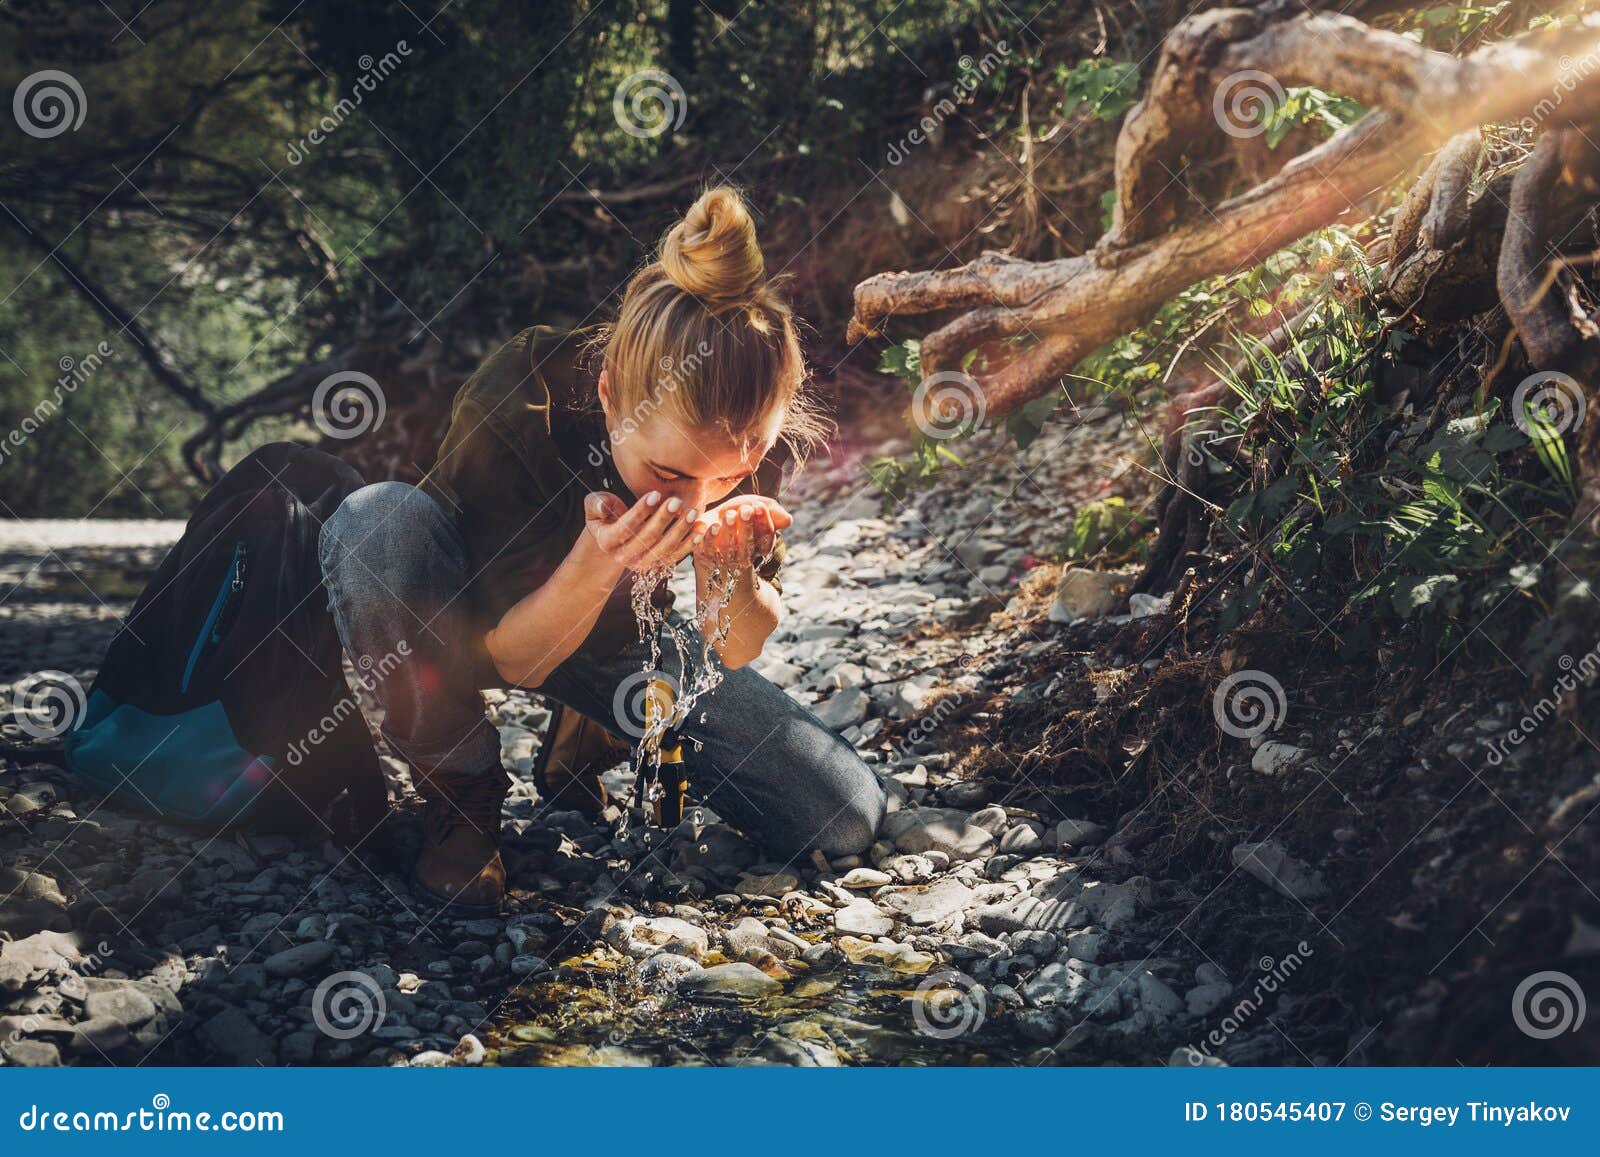 young woman washes her face from mountain river. tourism adventure bushcraft survival scout concept